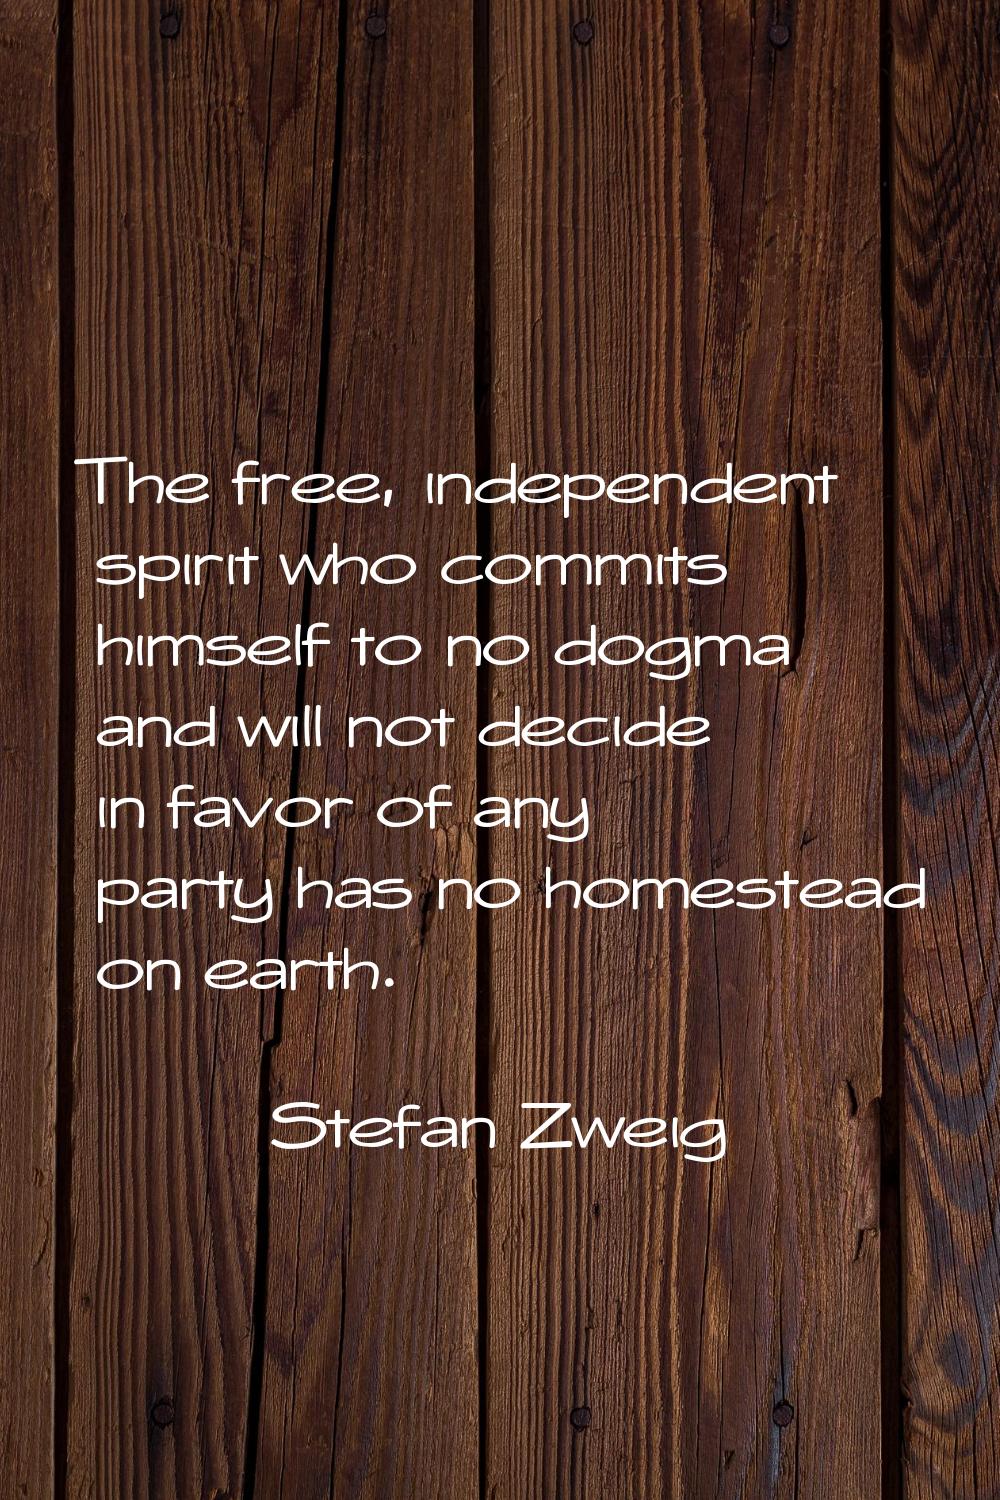 The free, independent spirit who commits himself to no dogma and will not decide in favor of any pa